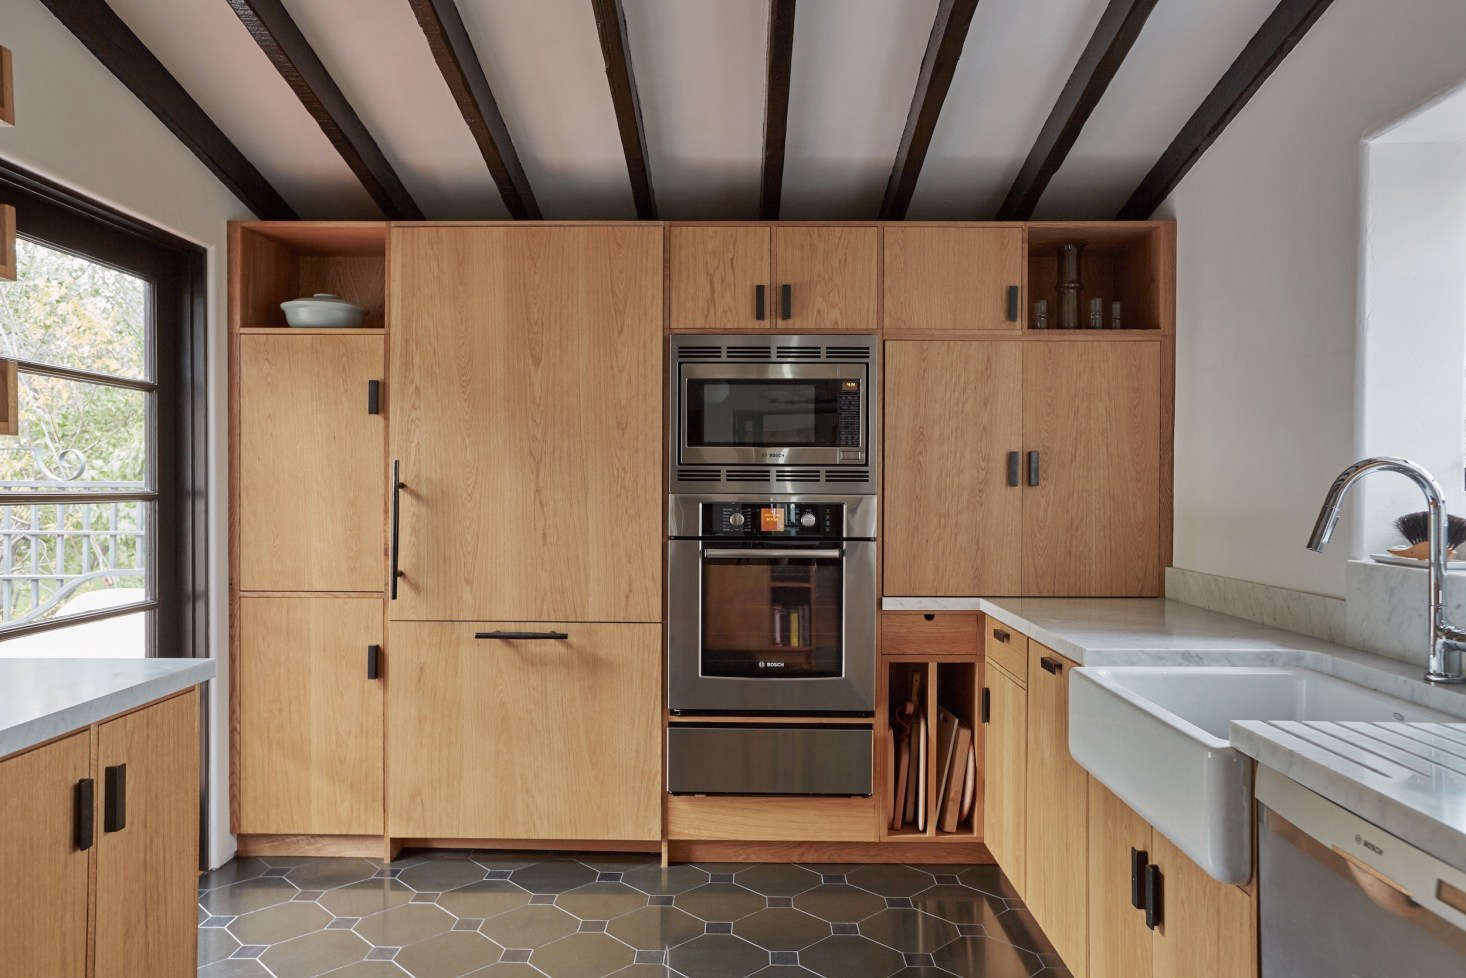 Trend Alert: 9 Kitchens with Floor-to-Ceiling Cabinetry - Remodelista